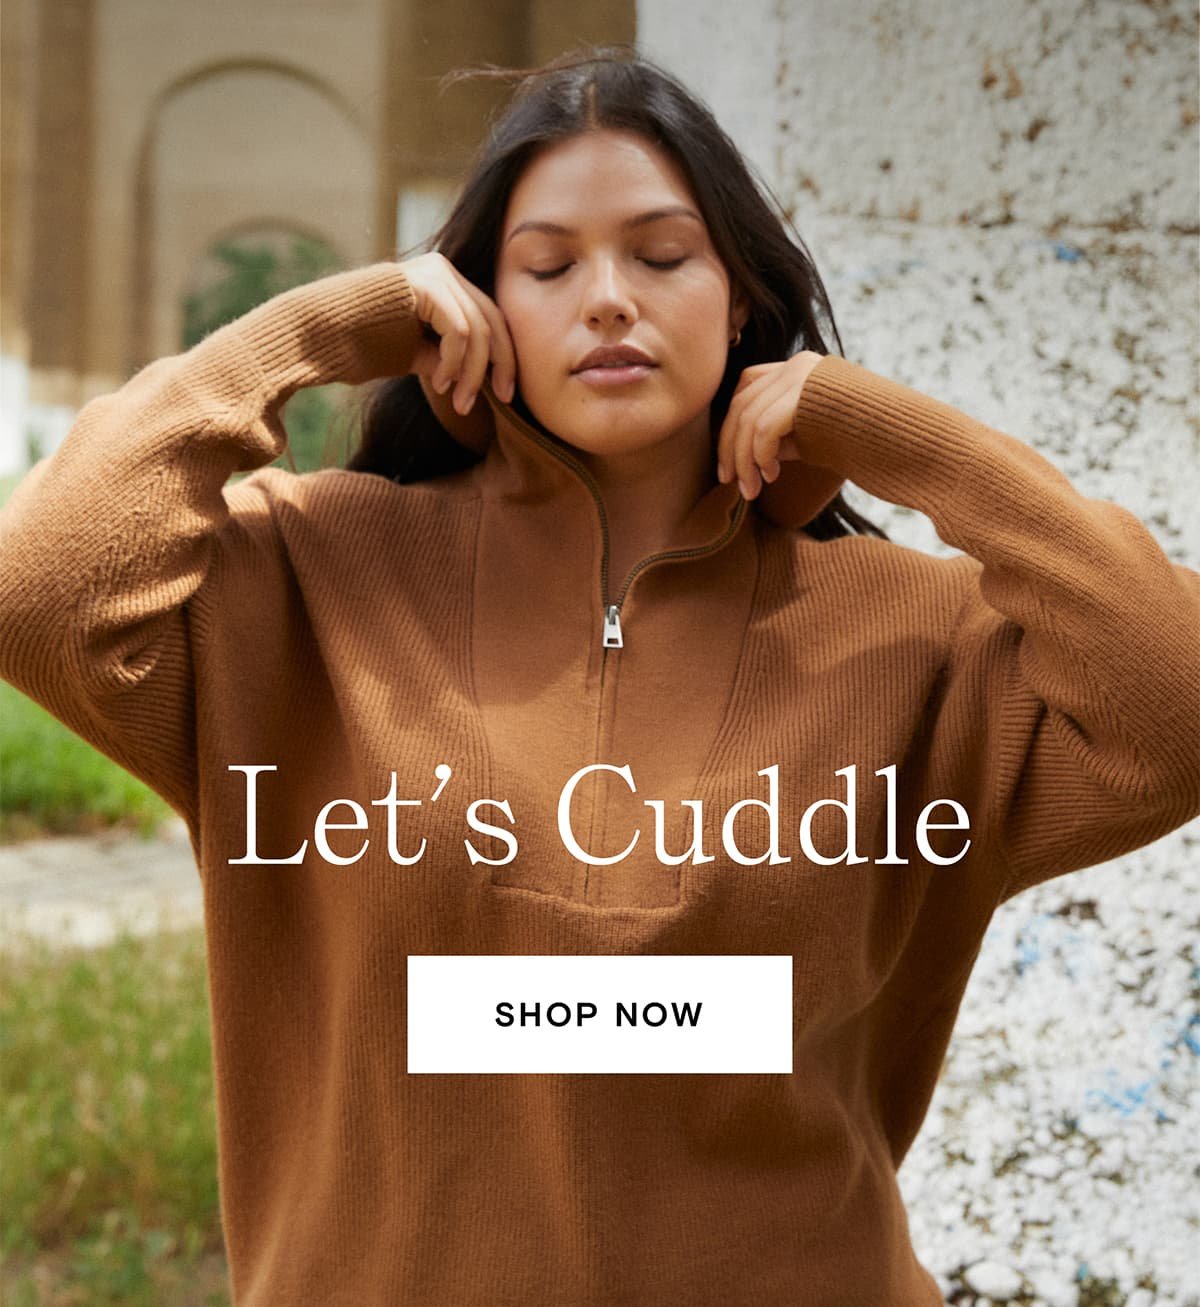 Cuddle up in these luxe sweaters